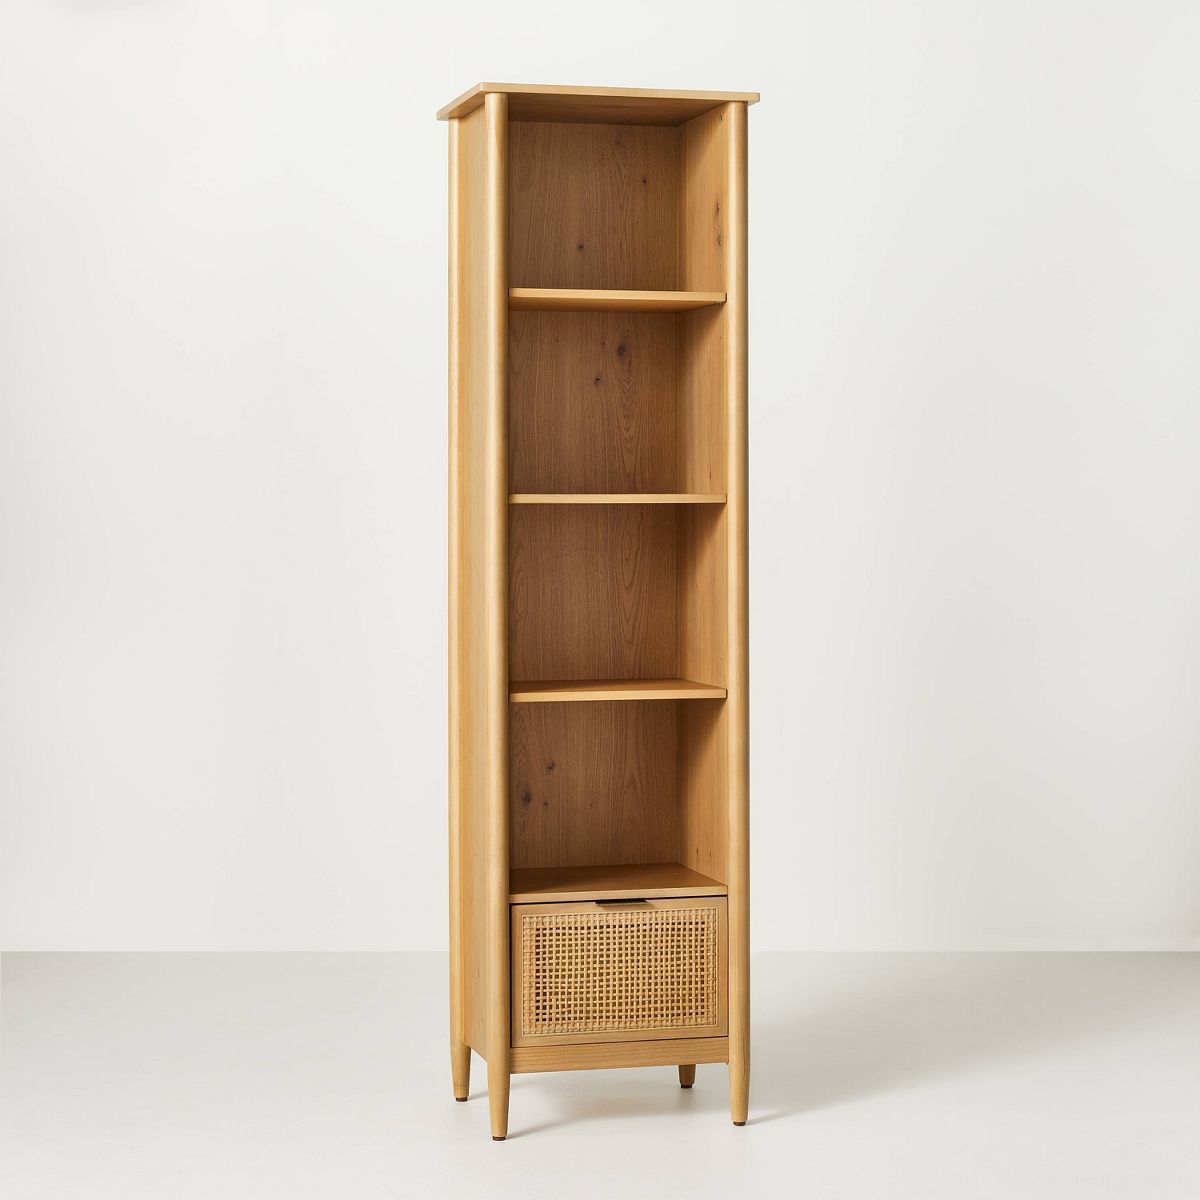 Modular Wood & Cane Entryway Storage Cabinet - Natural - Hearth & Hand™ with Magnolia | Target